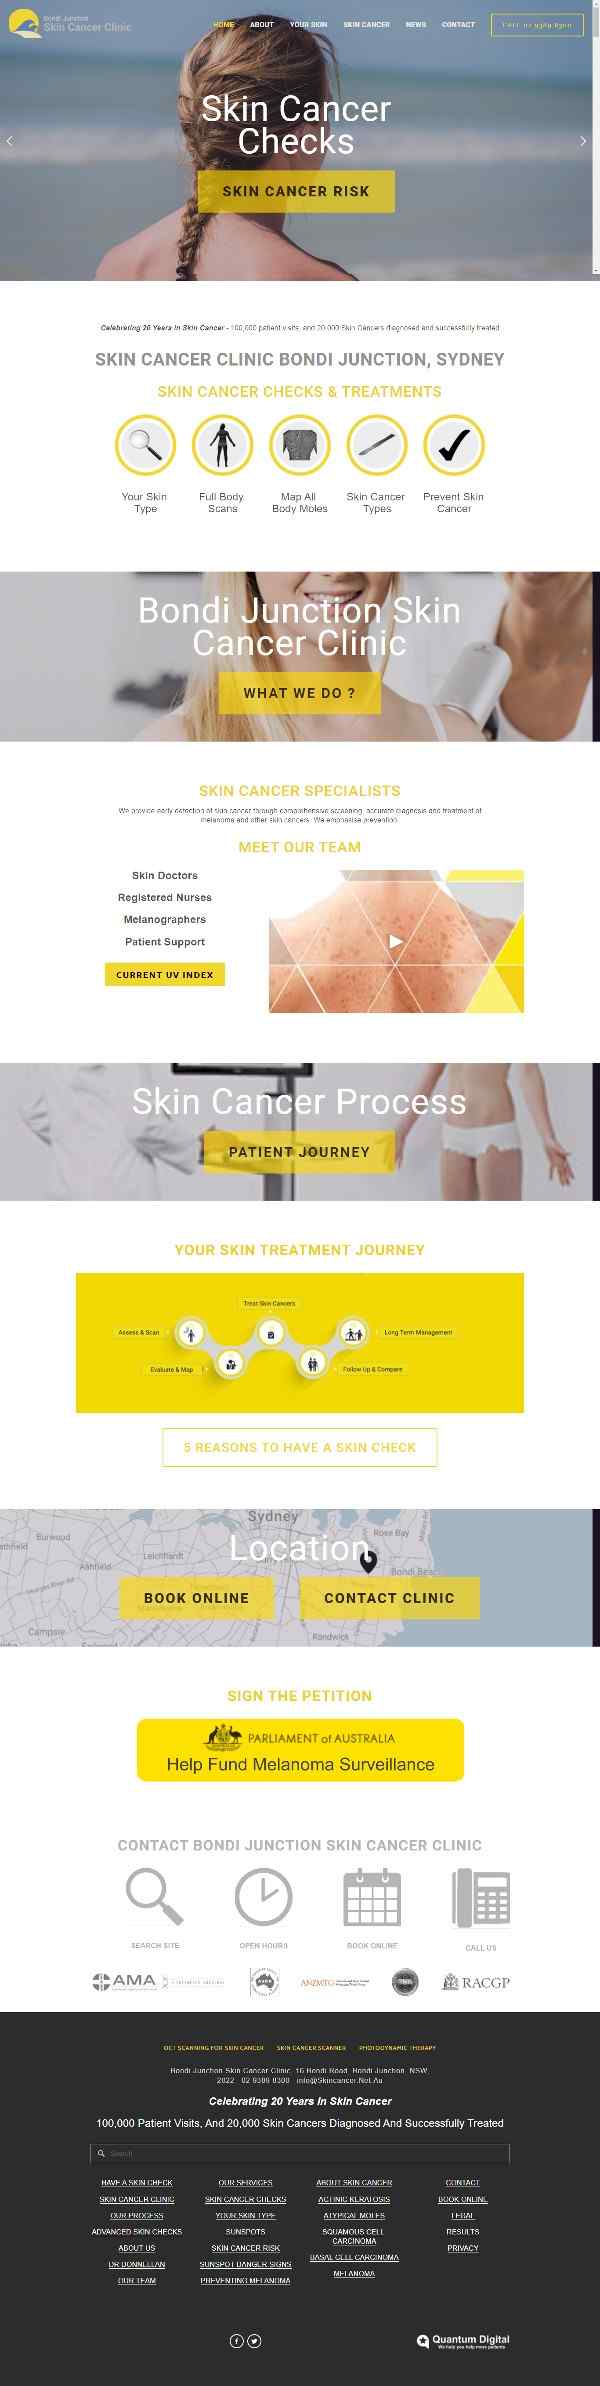 About Bondi Junction Skin Cancer Clinic